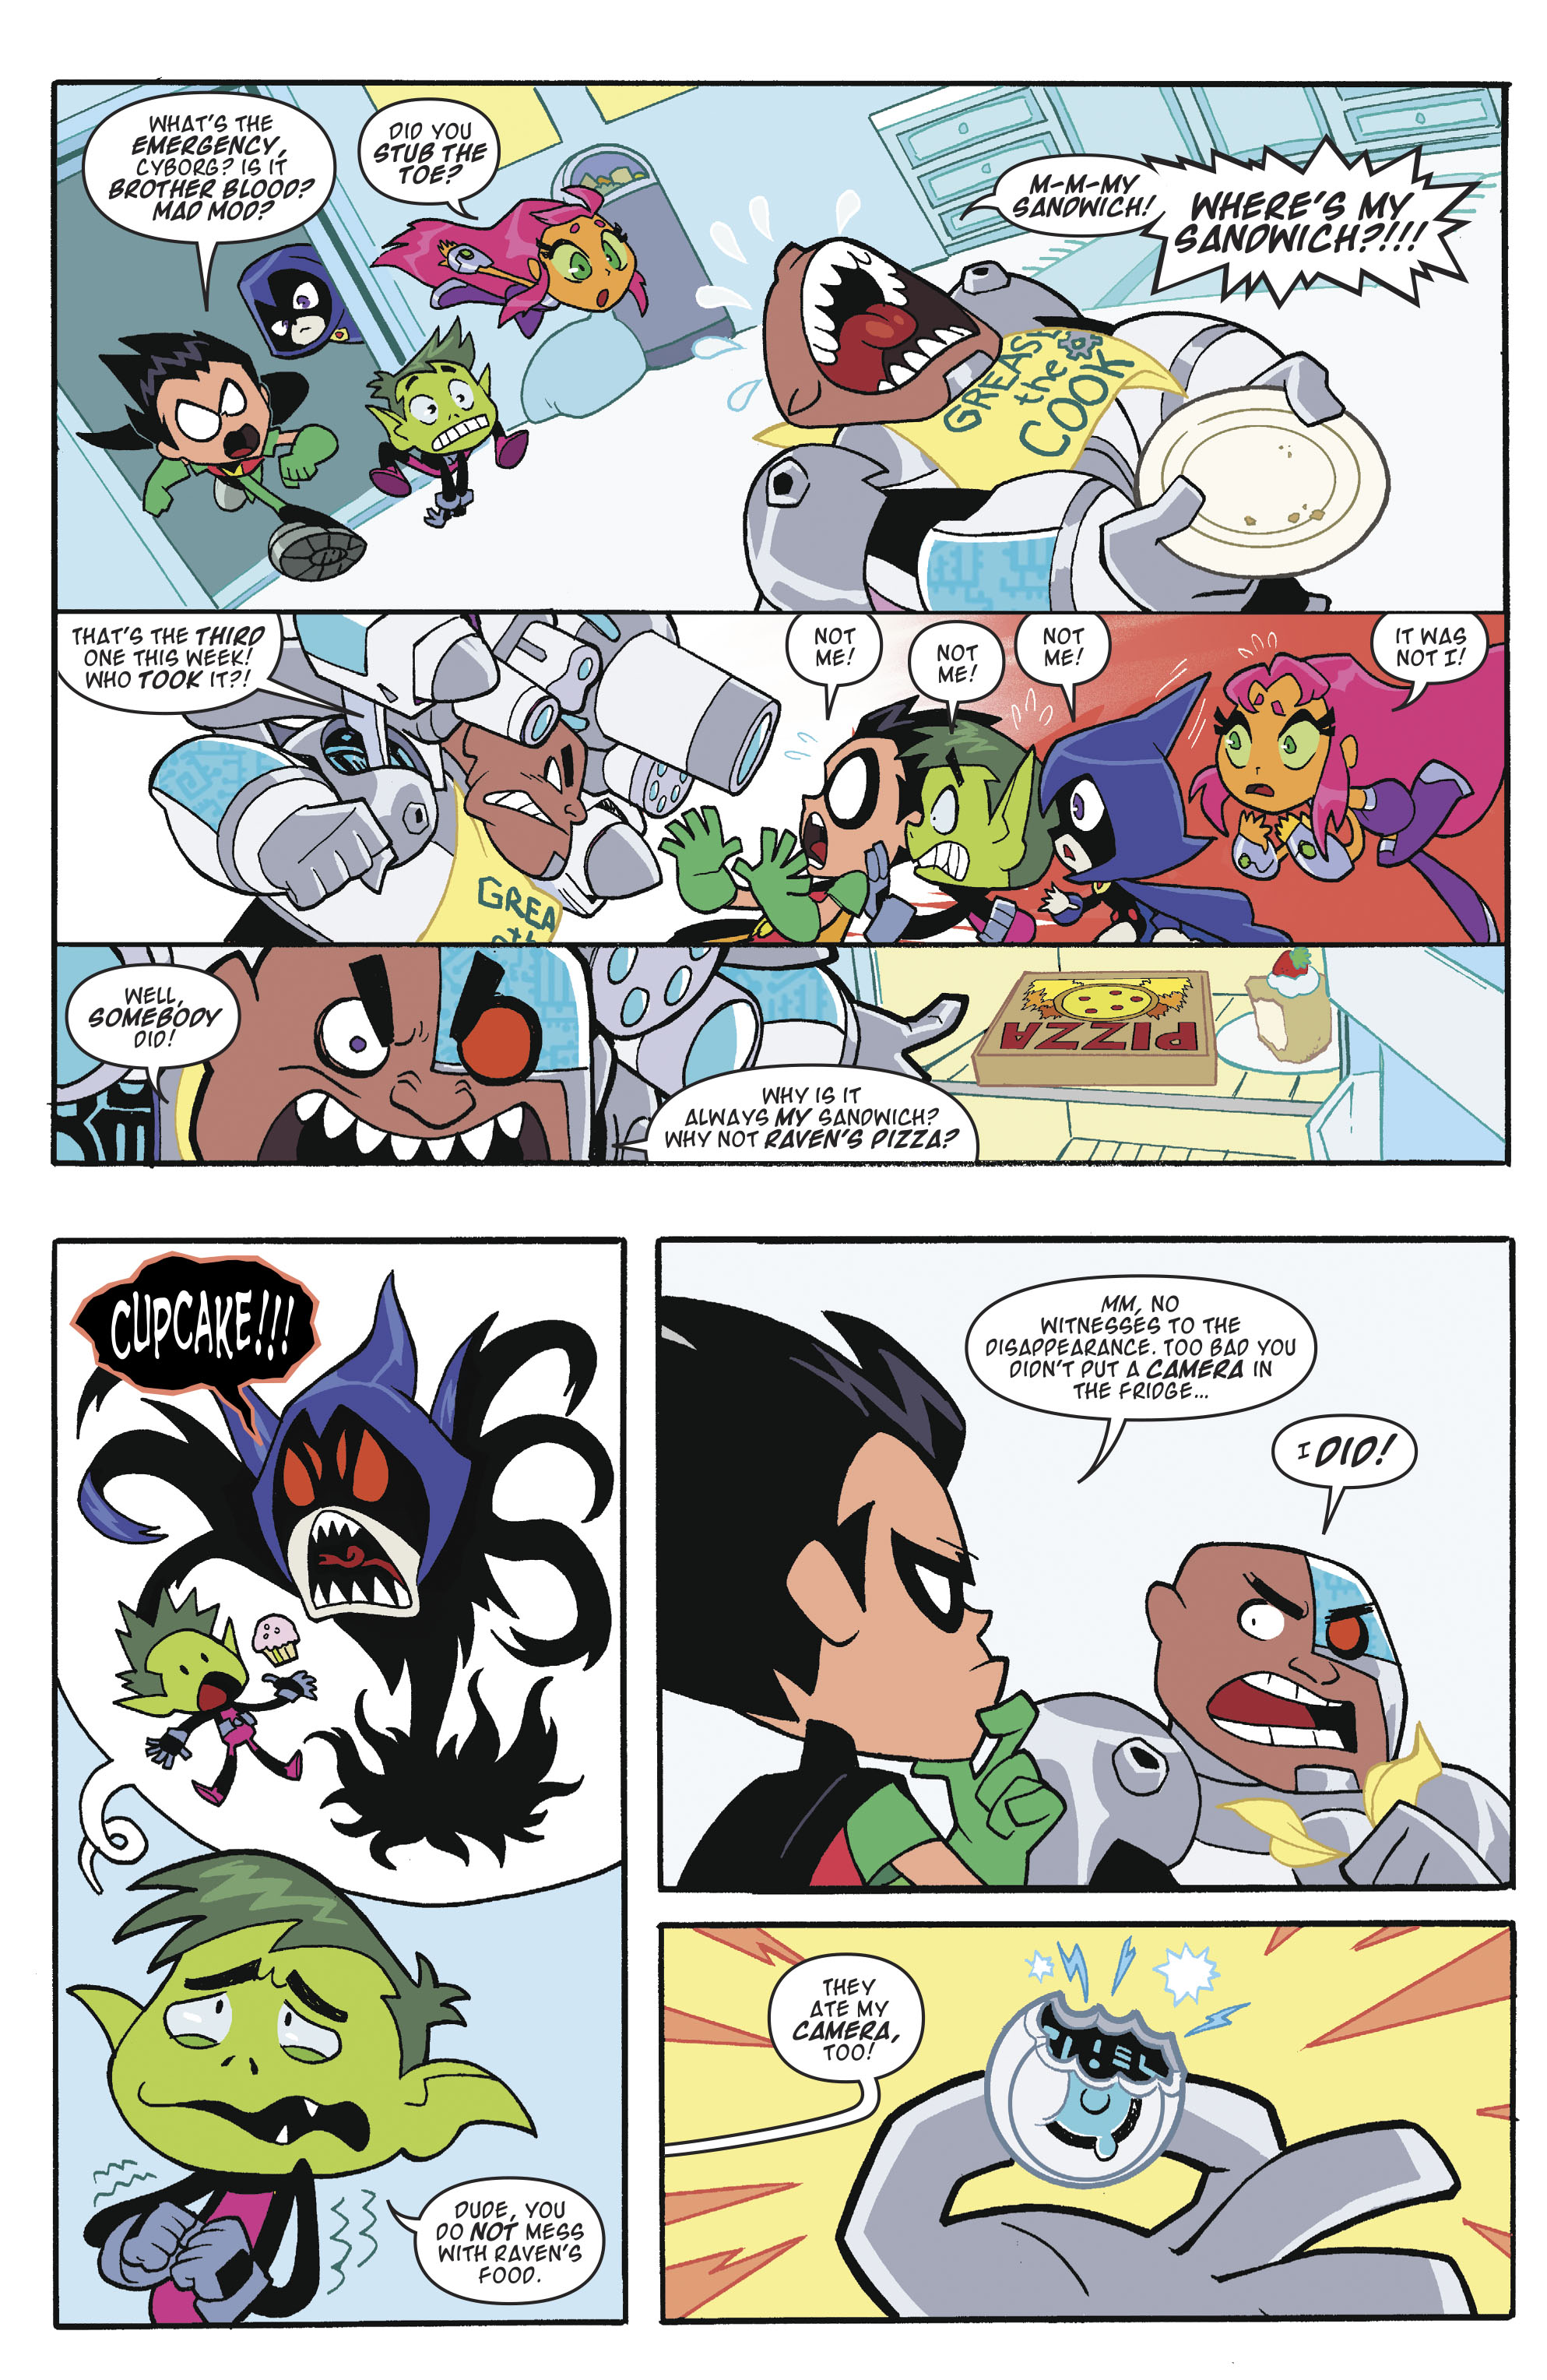 Teen Titans Go! To the Movies (2018): Chapter 1 - Page 3